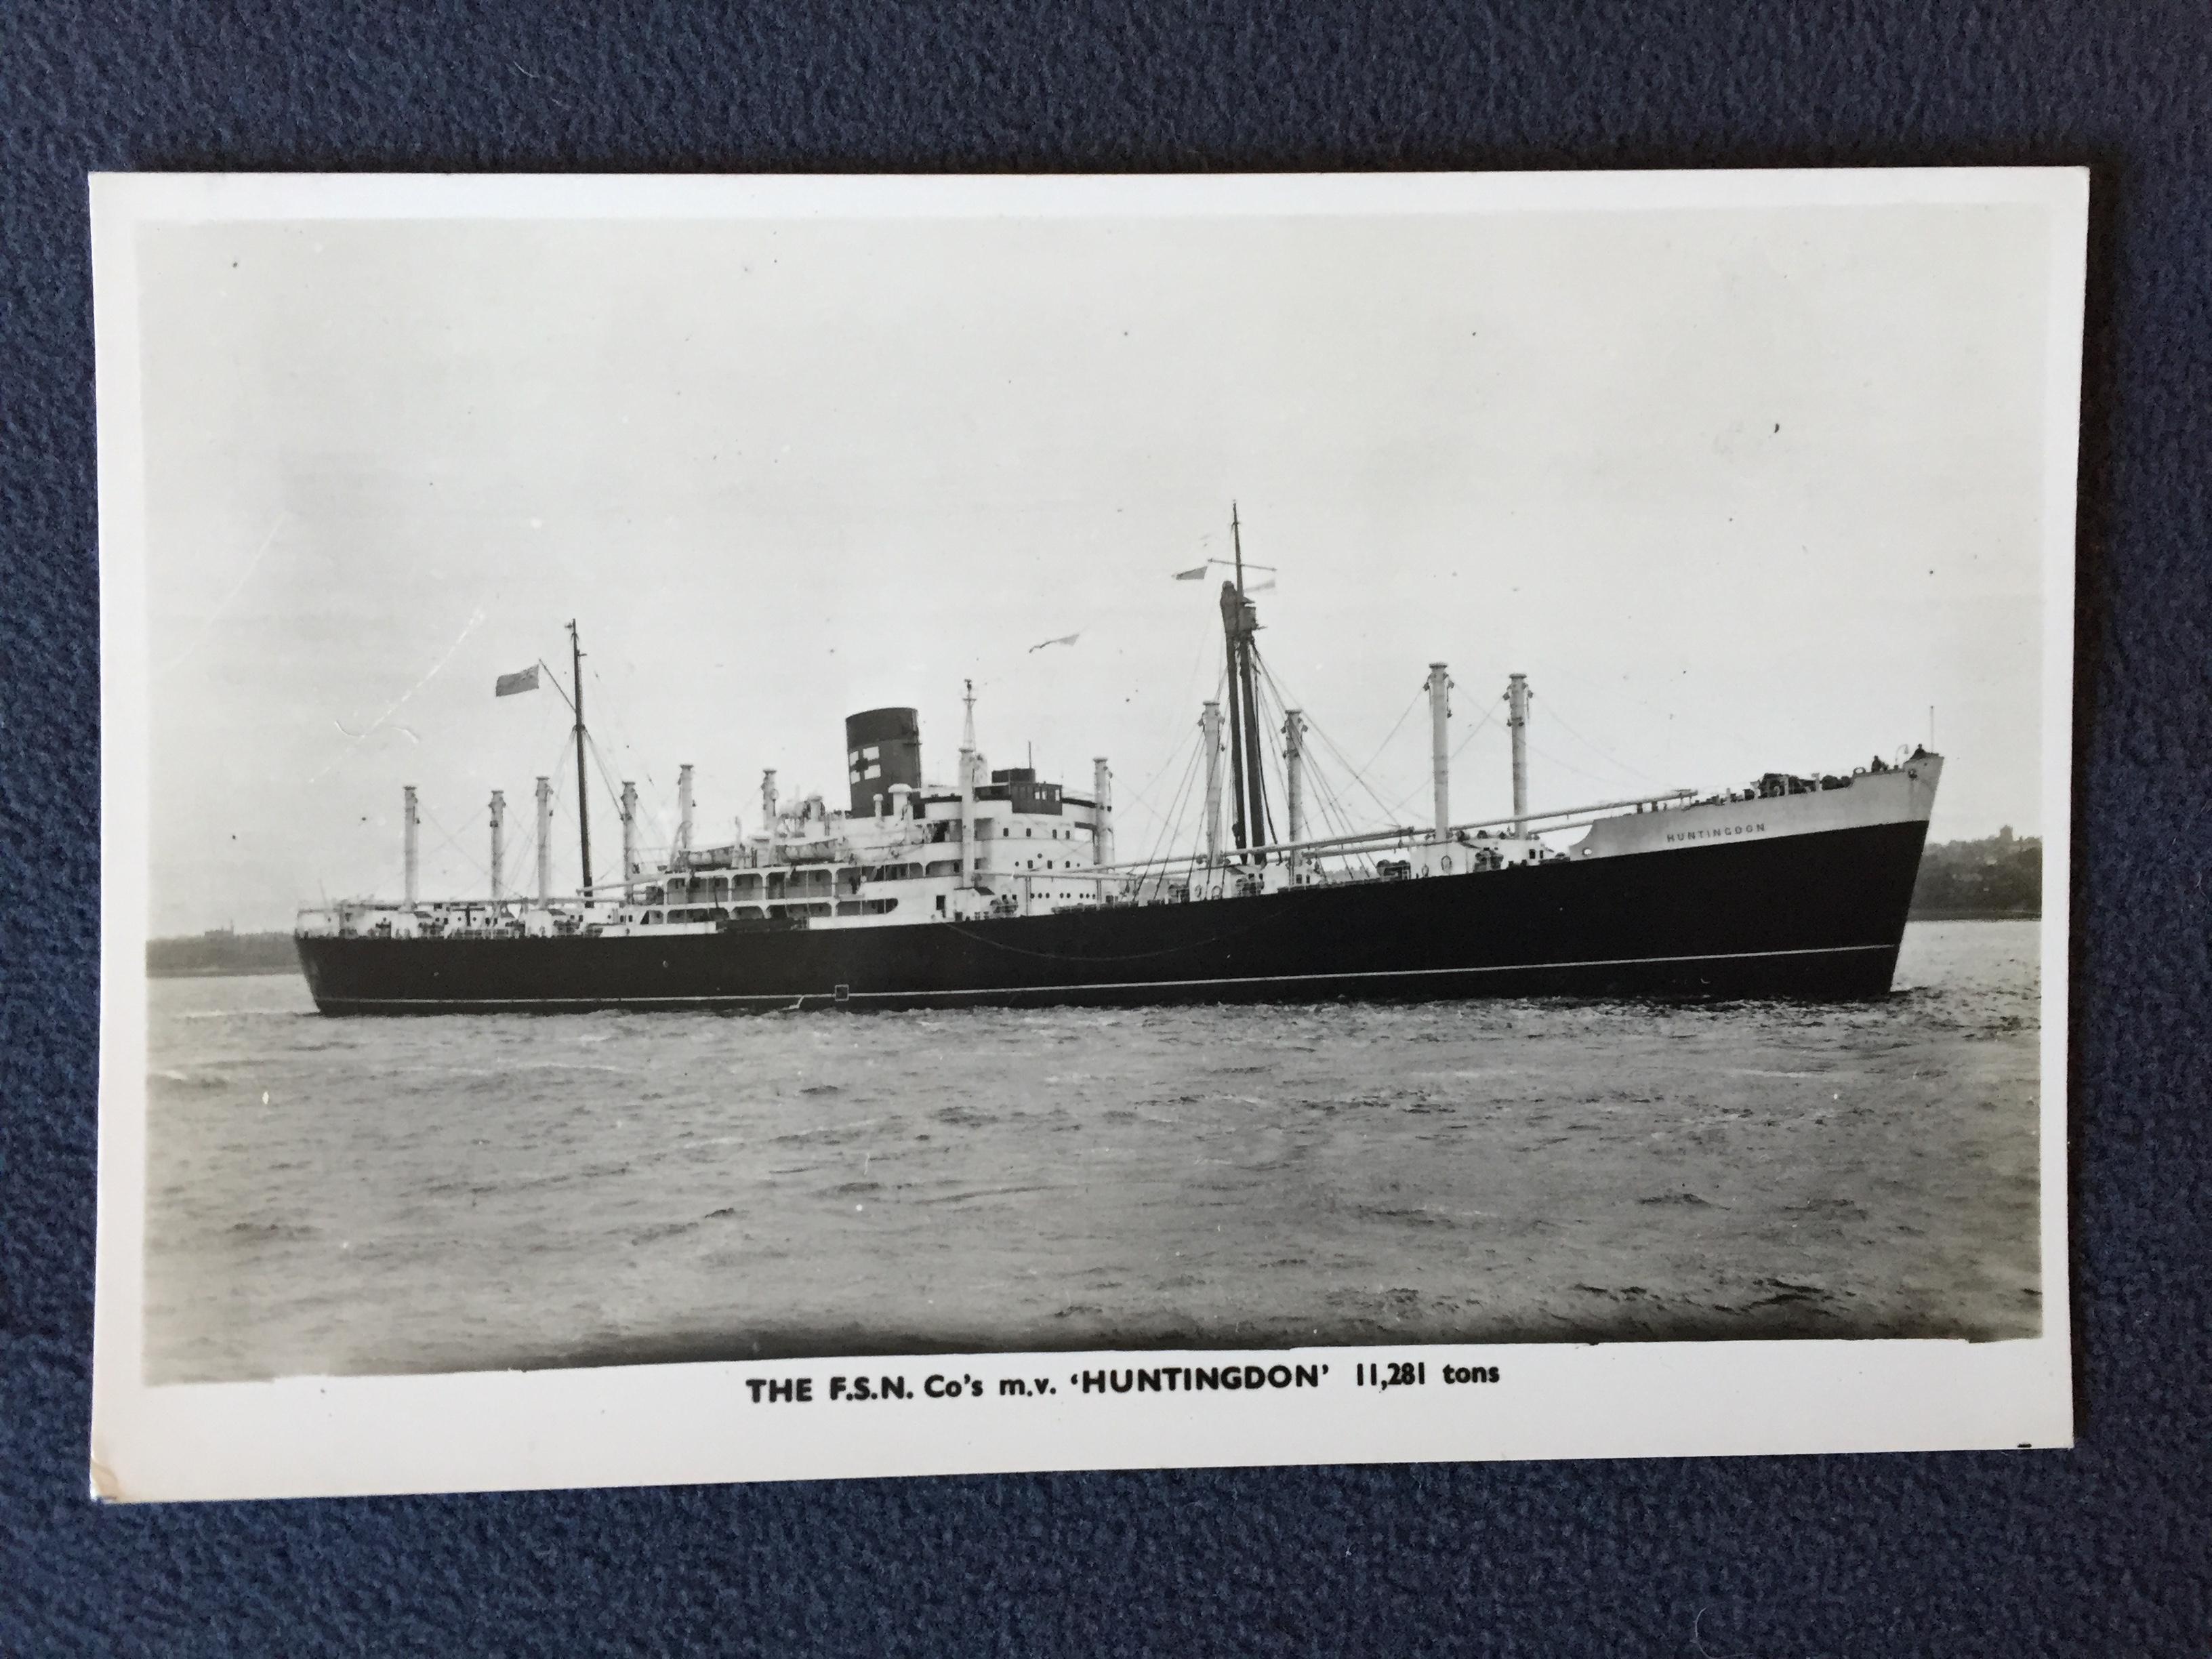 B/W PHOTOGRAPH OF THE VESSEL THE HUNTINGDON FROM THE PACIFIC STAM NAVIGATION COMPANY